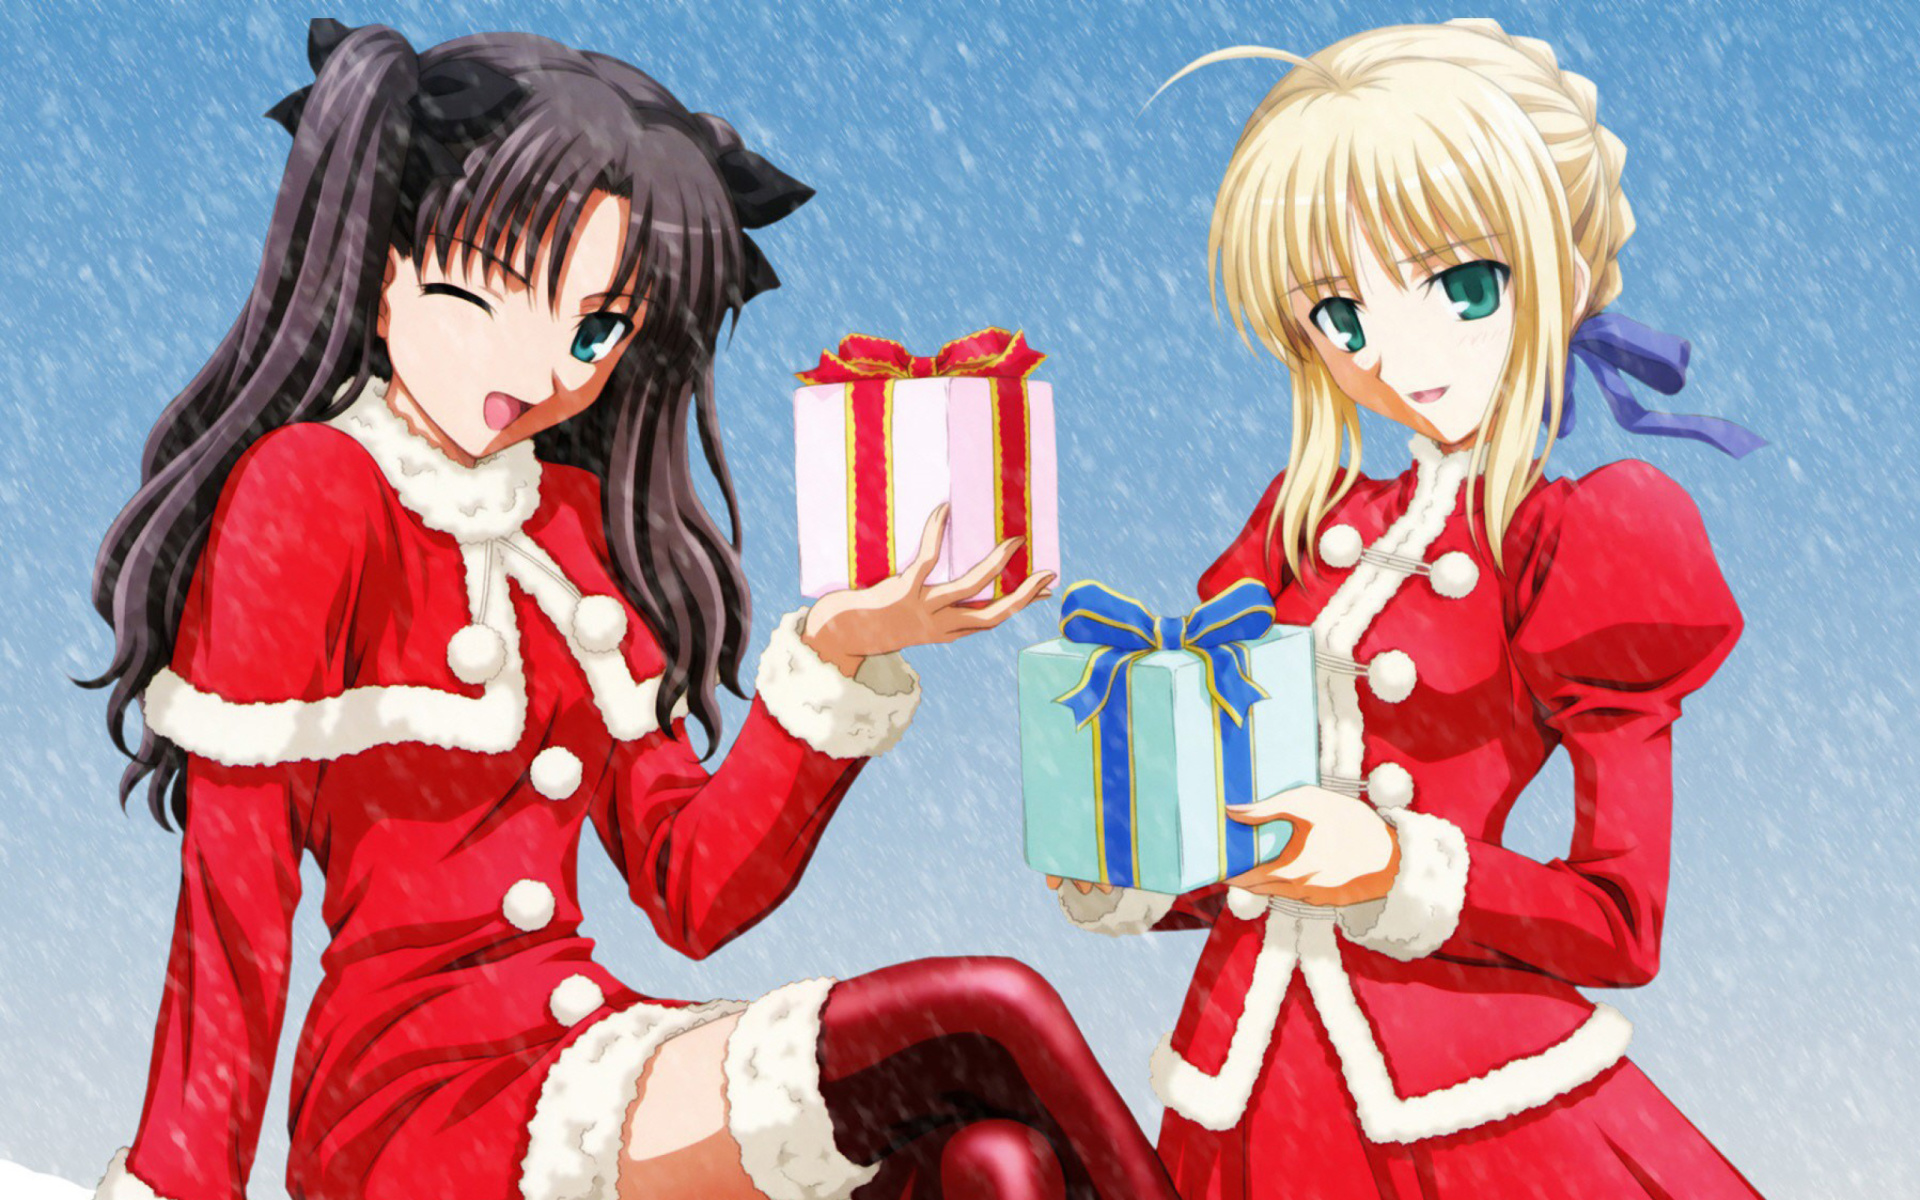 Anime Christmas Wallpapers for Widescreen Desktop PC 1920x1080 Full HD